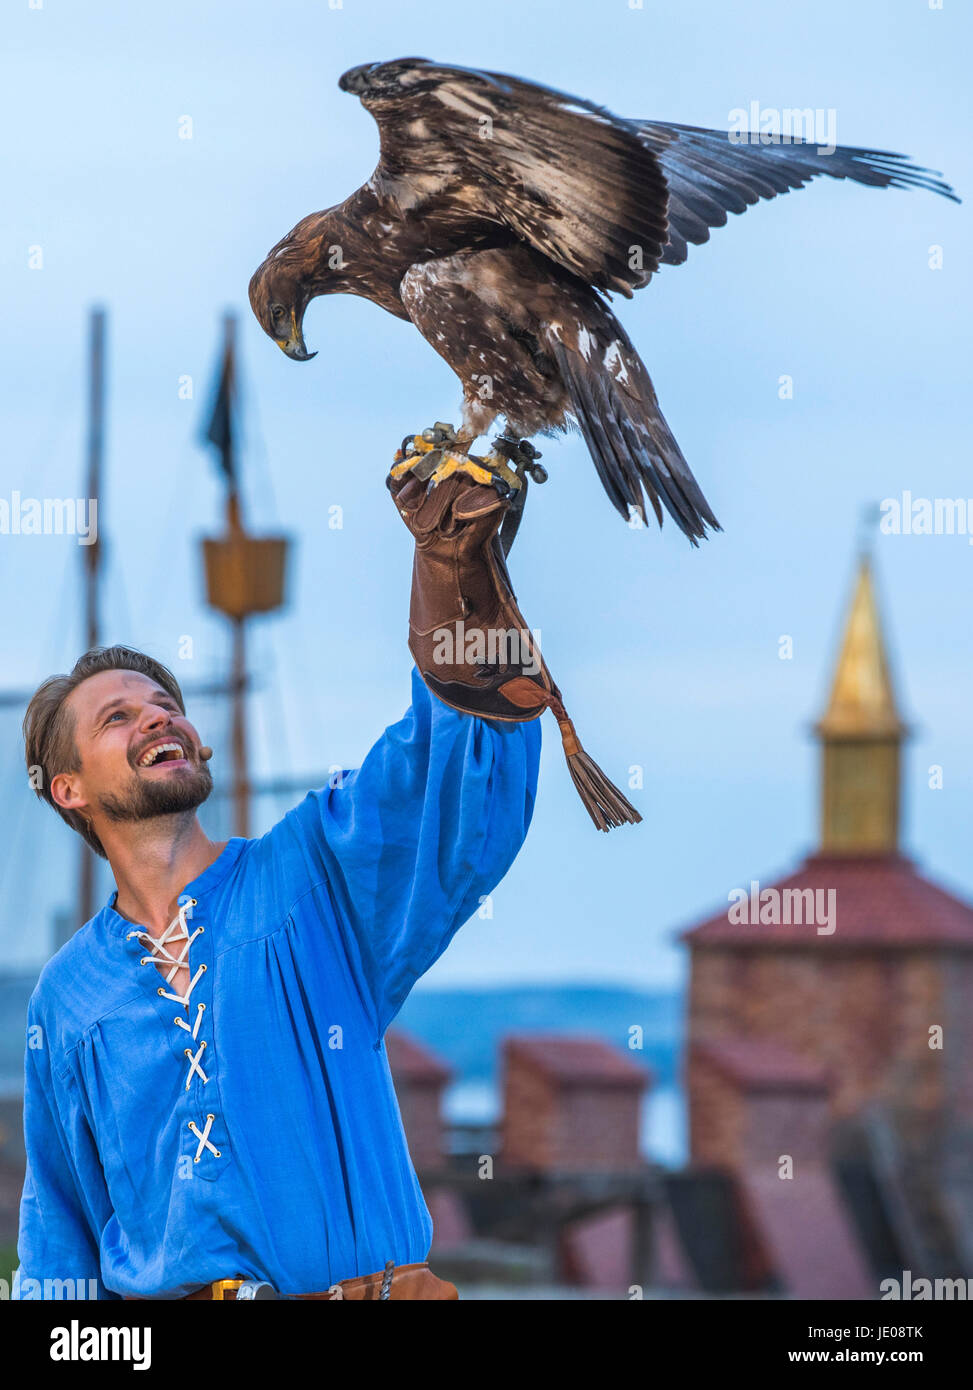 Bastian Semm as the pirate Klaus Stoertebeker and the eagle 'Laran' can be seen during a press viewing of the Stoertebeker Festival on the natural stage Ralswiek on the island Ruegen, Germany, 21 June 2017. This years performance with the titel 'In the shadow of death' will premiere on the 24th of June 2017. The Stoertebeker Festival has been taking place at the island Ruegen for 25 years now. Photo: Jens Büttner/dpa-Zentralbild/dpa Stock Photo